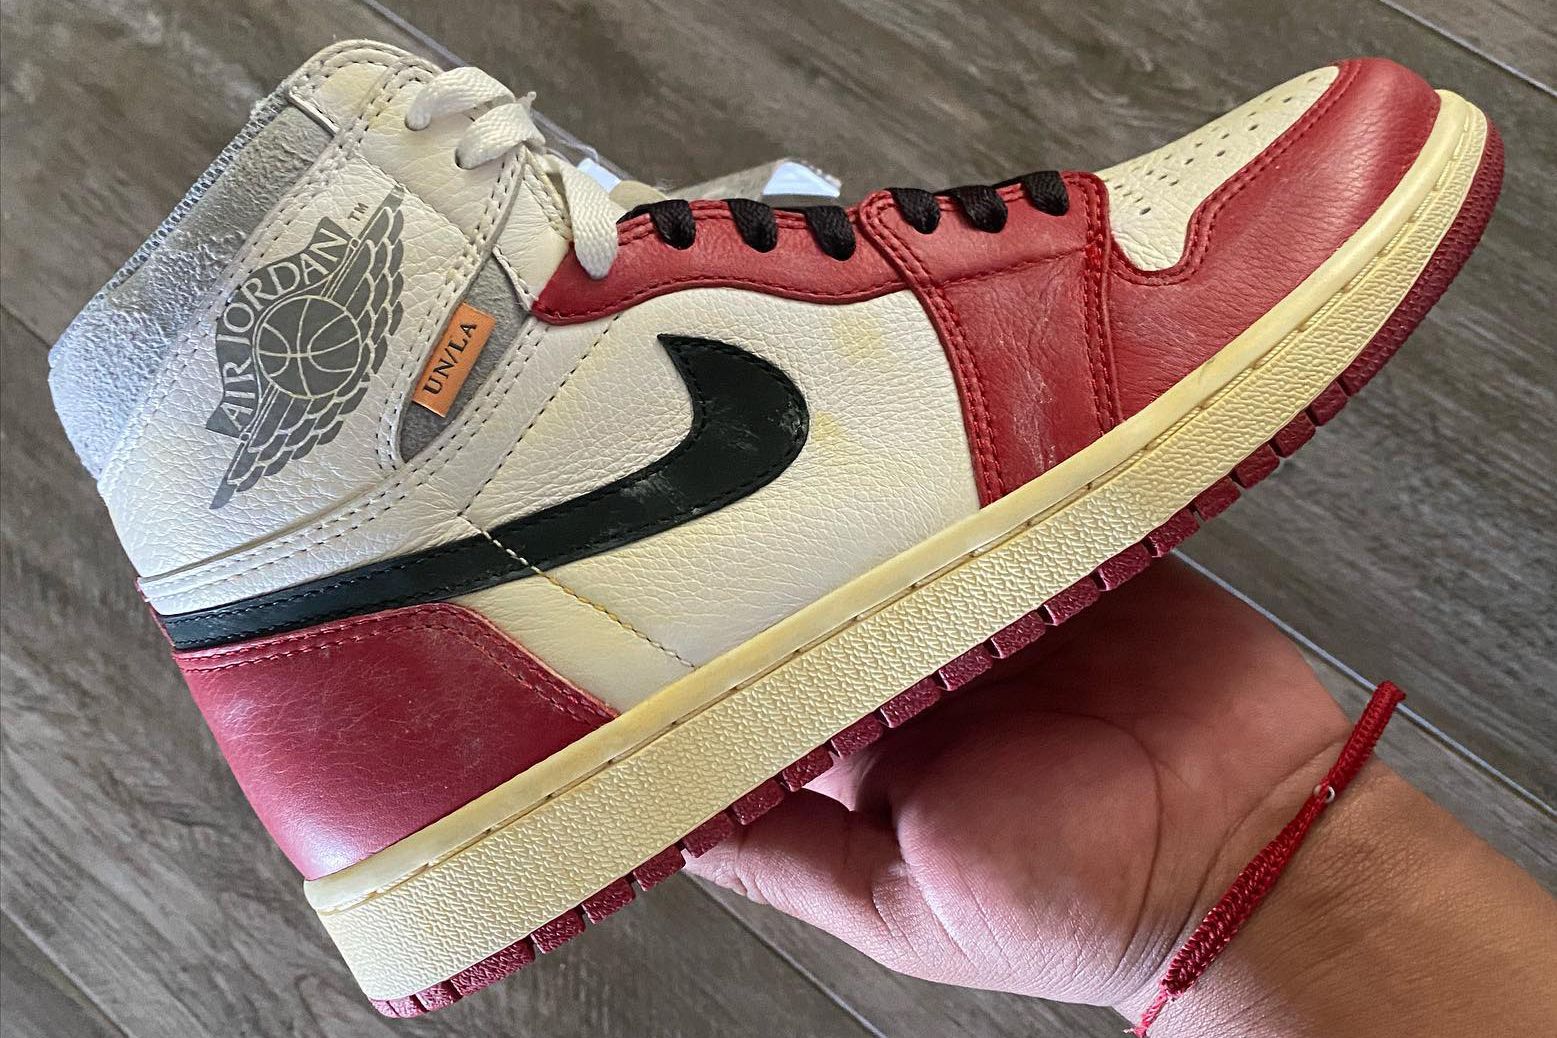 Chicago' and 'Neutral Grey' Meet On this Union x Air Jordan 1